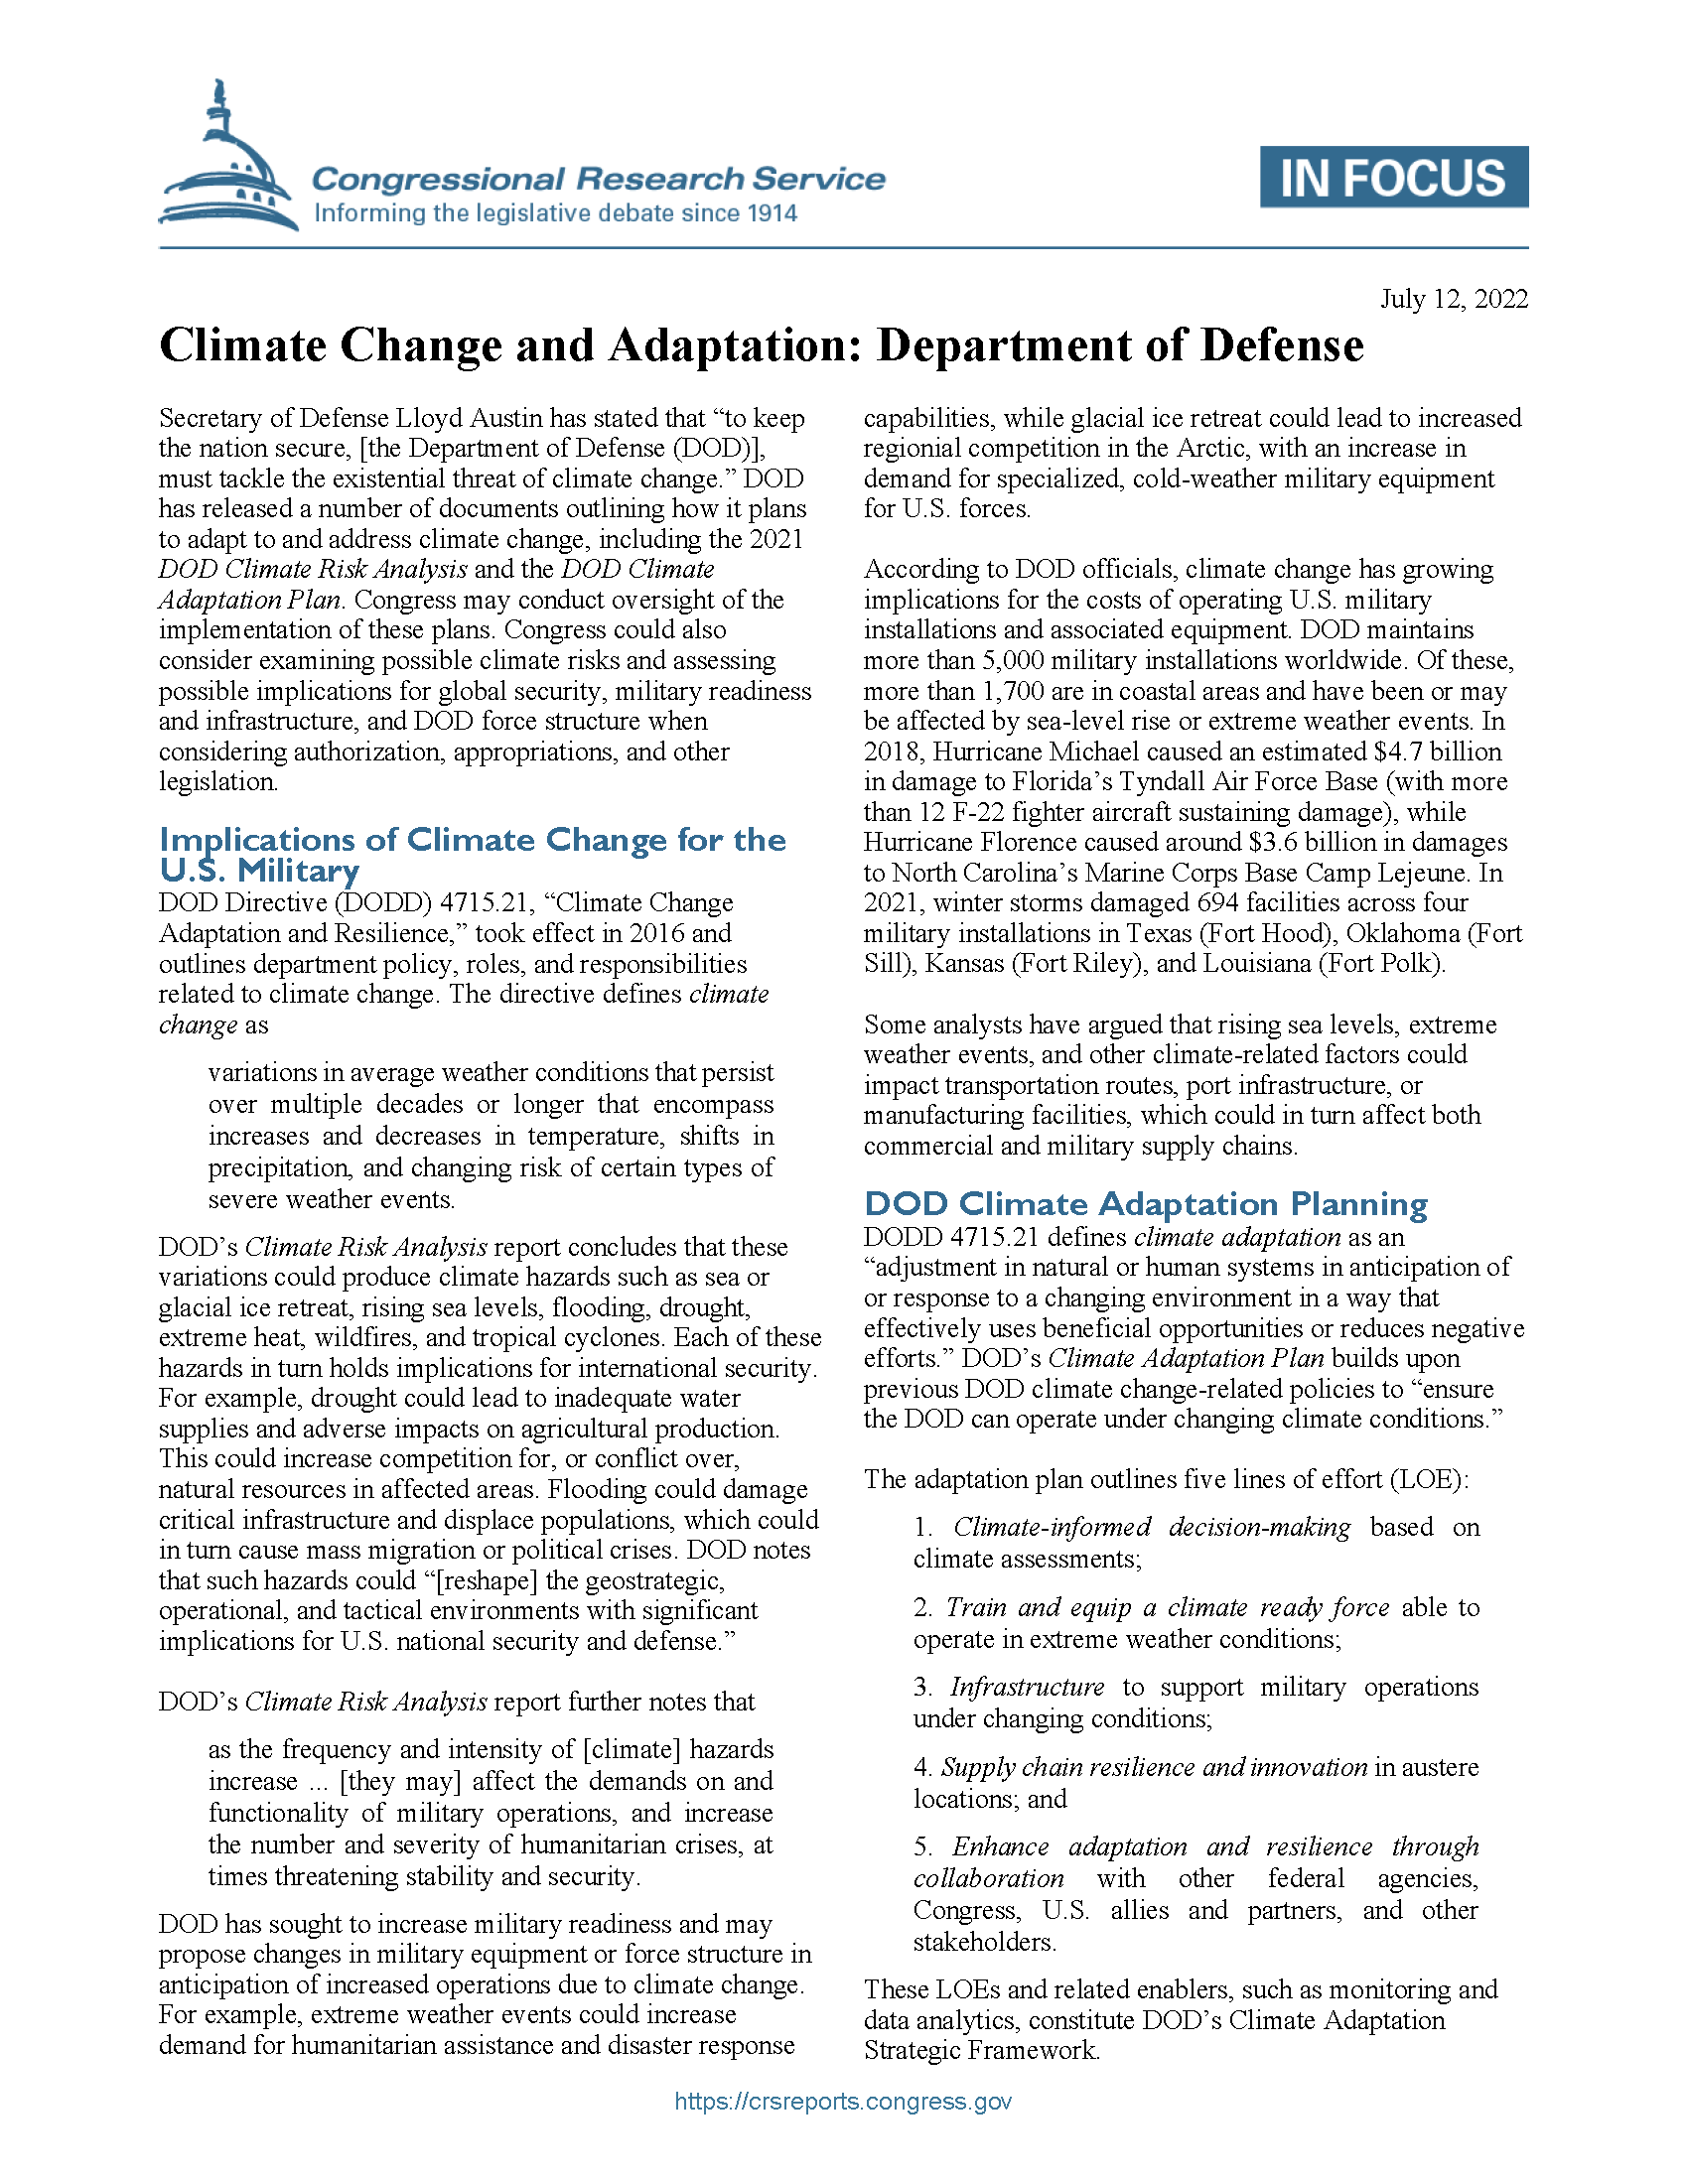 Cover page for Climate Change and Adaptation: Department of Defense